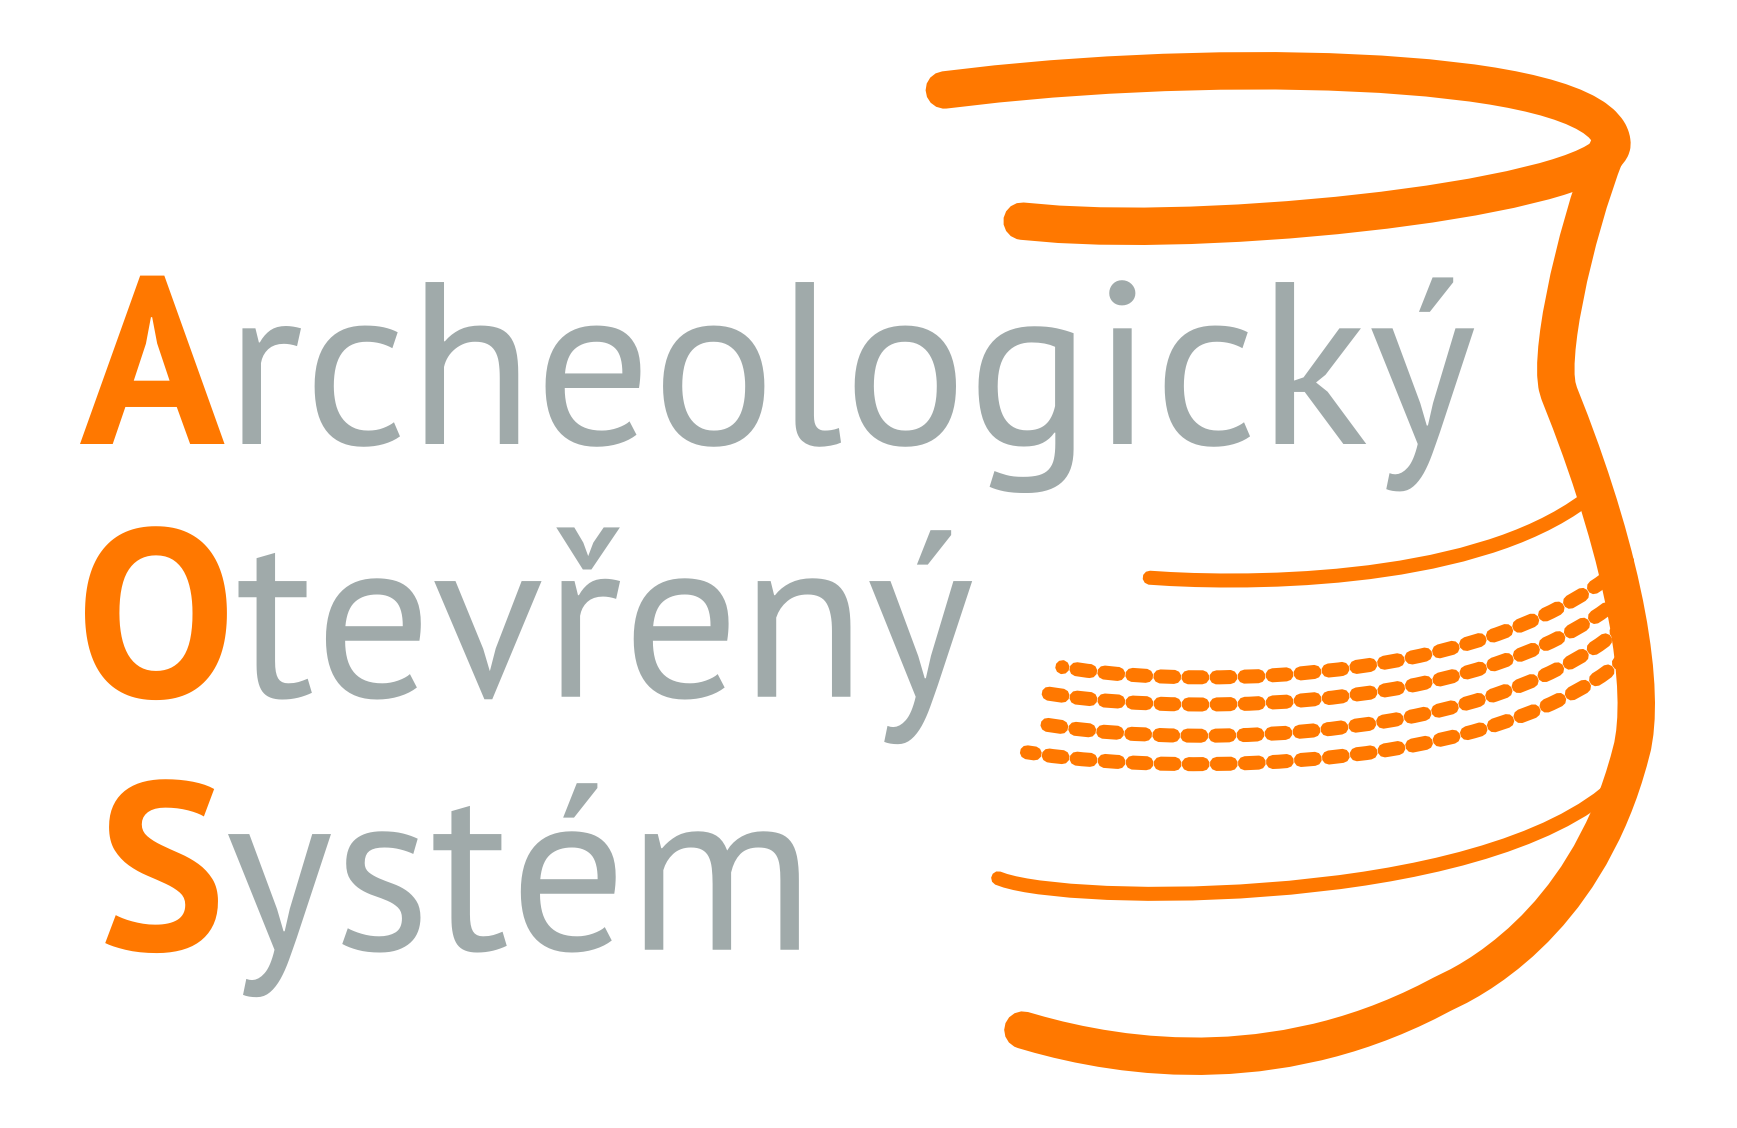 Archaeological Open System